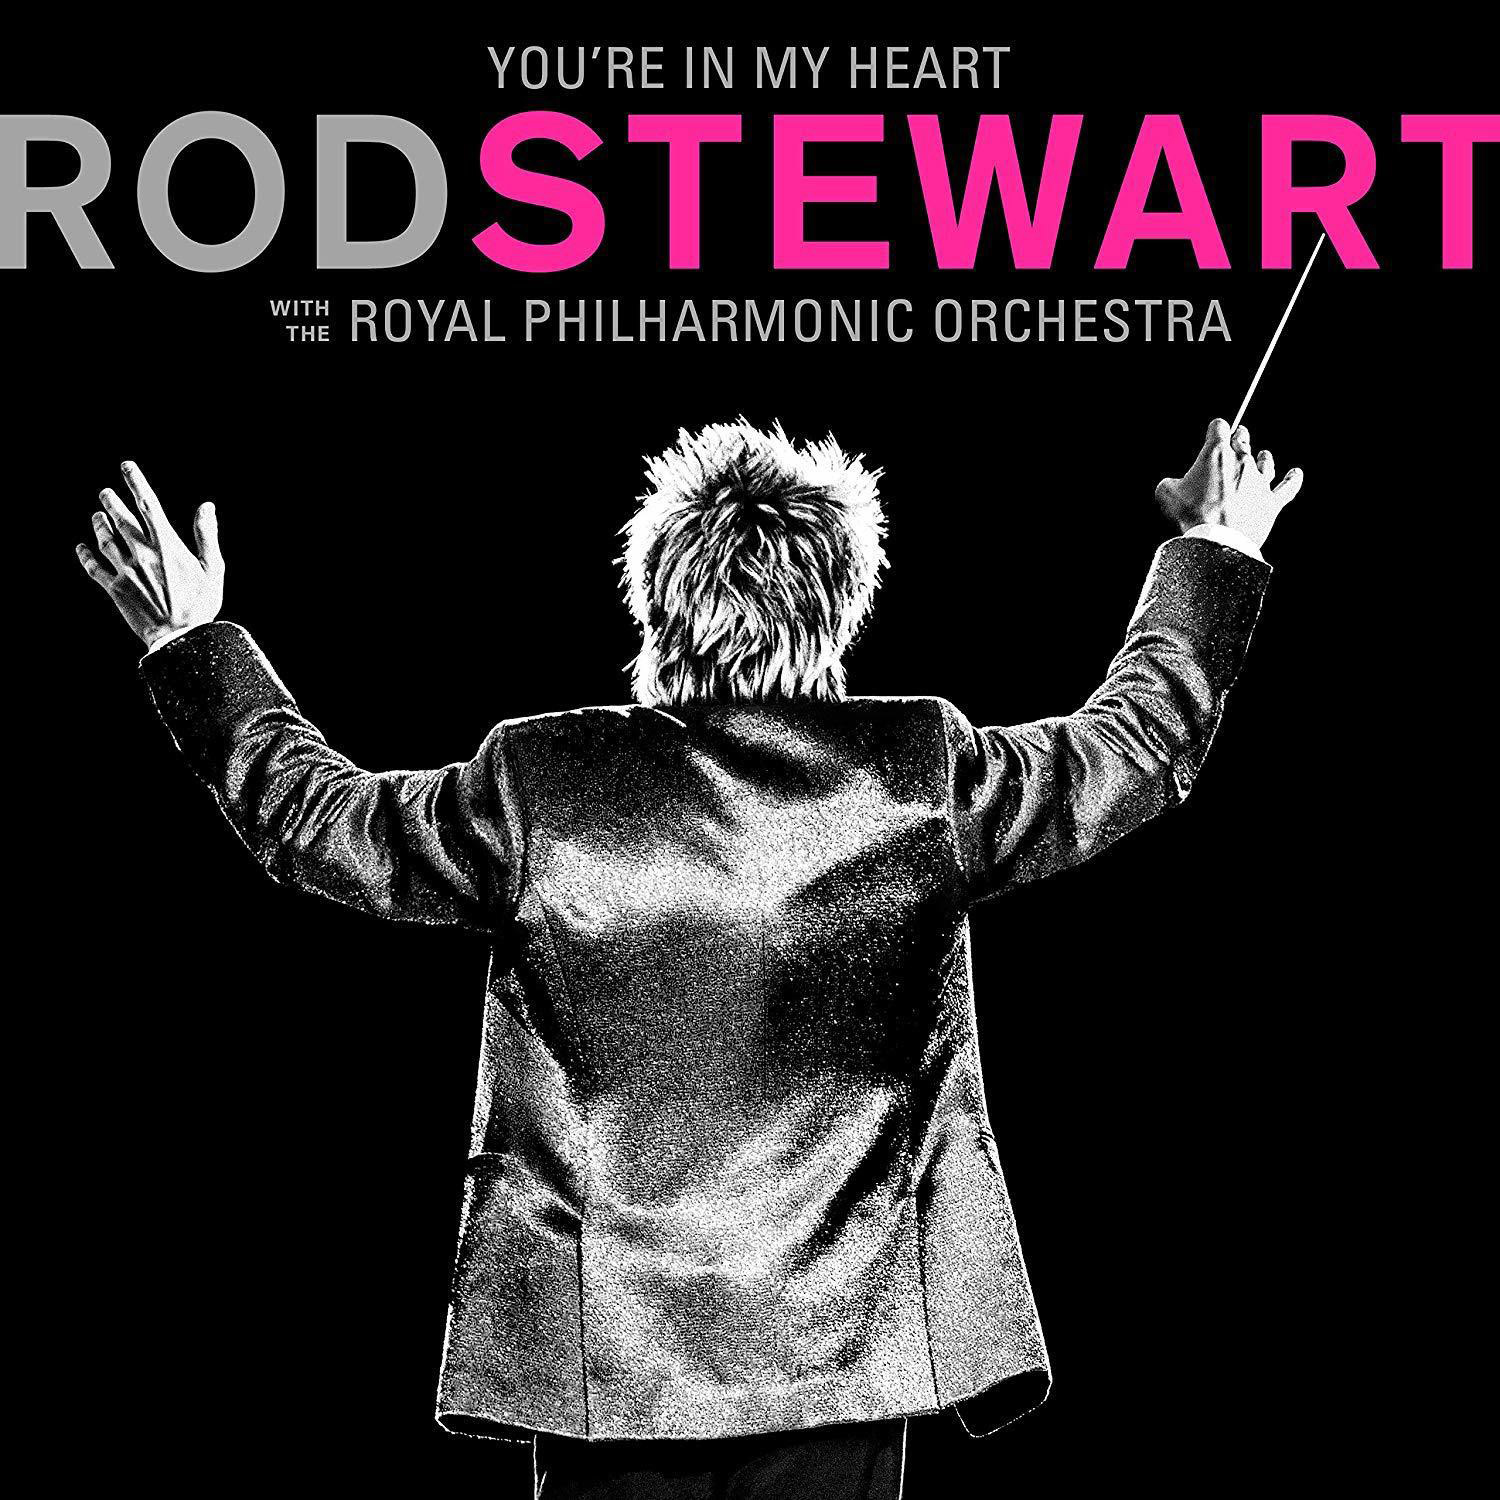 (CD) (WITH - IN HEART MY Stewart YOU\'RE - THE Rod